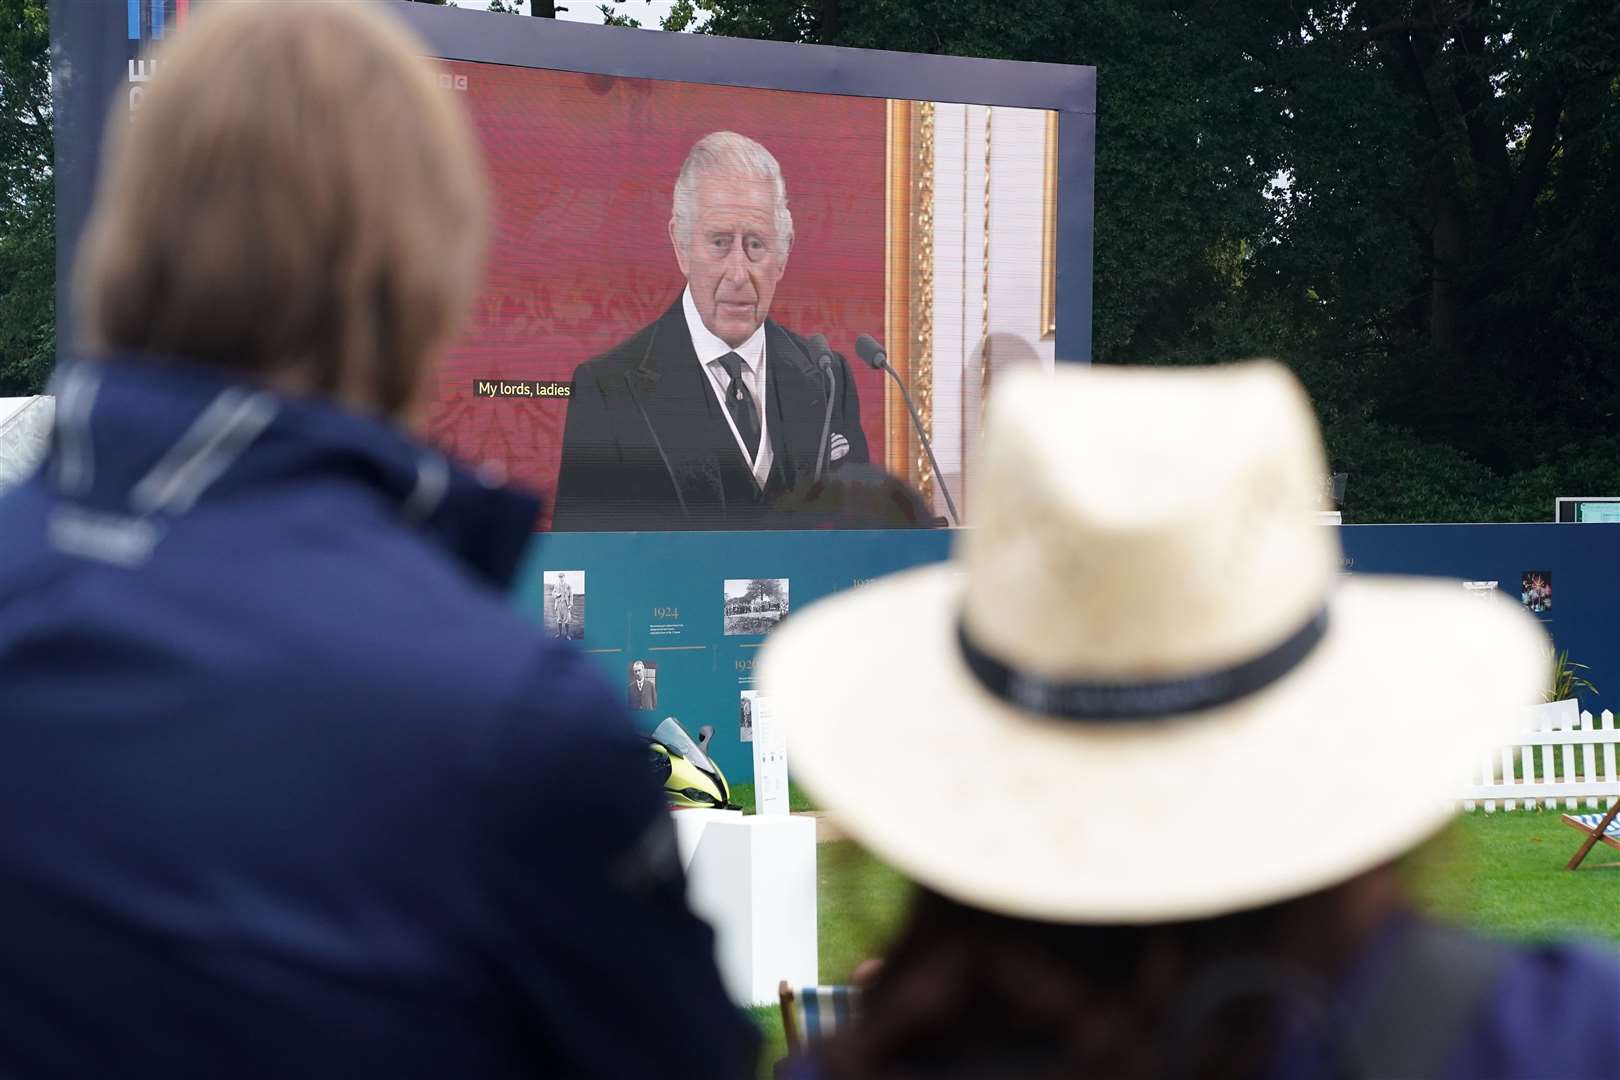 Spectators watch the Accession Council, where King Charles III is formally proclaimed monarch, on the big screen at Wentworth Golf Club (Adam Davy/PA)